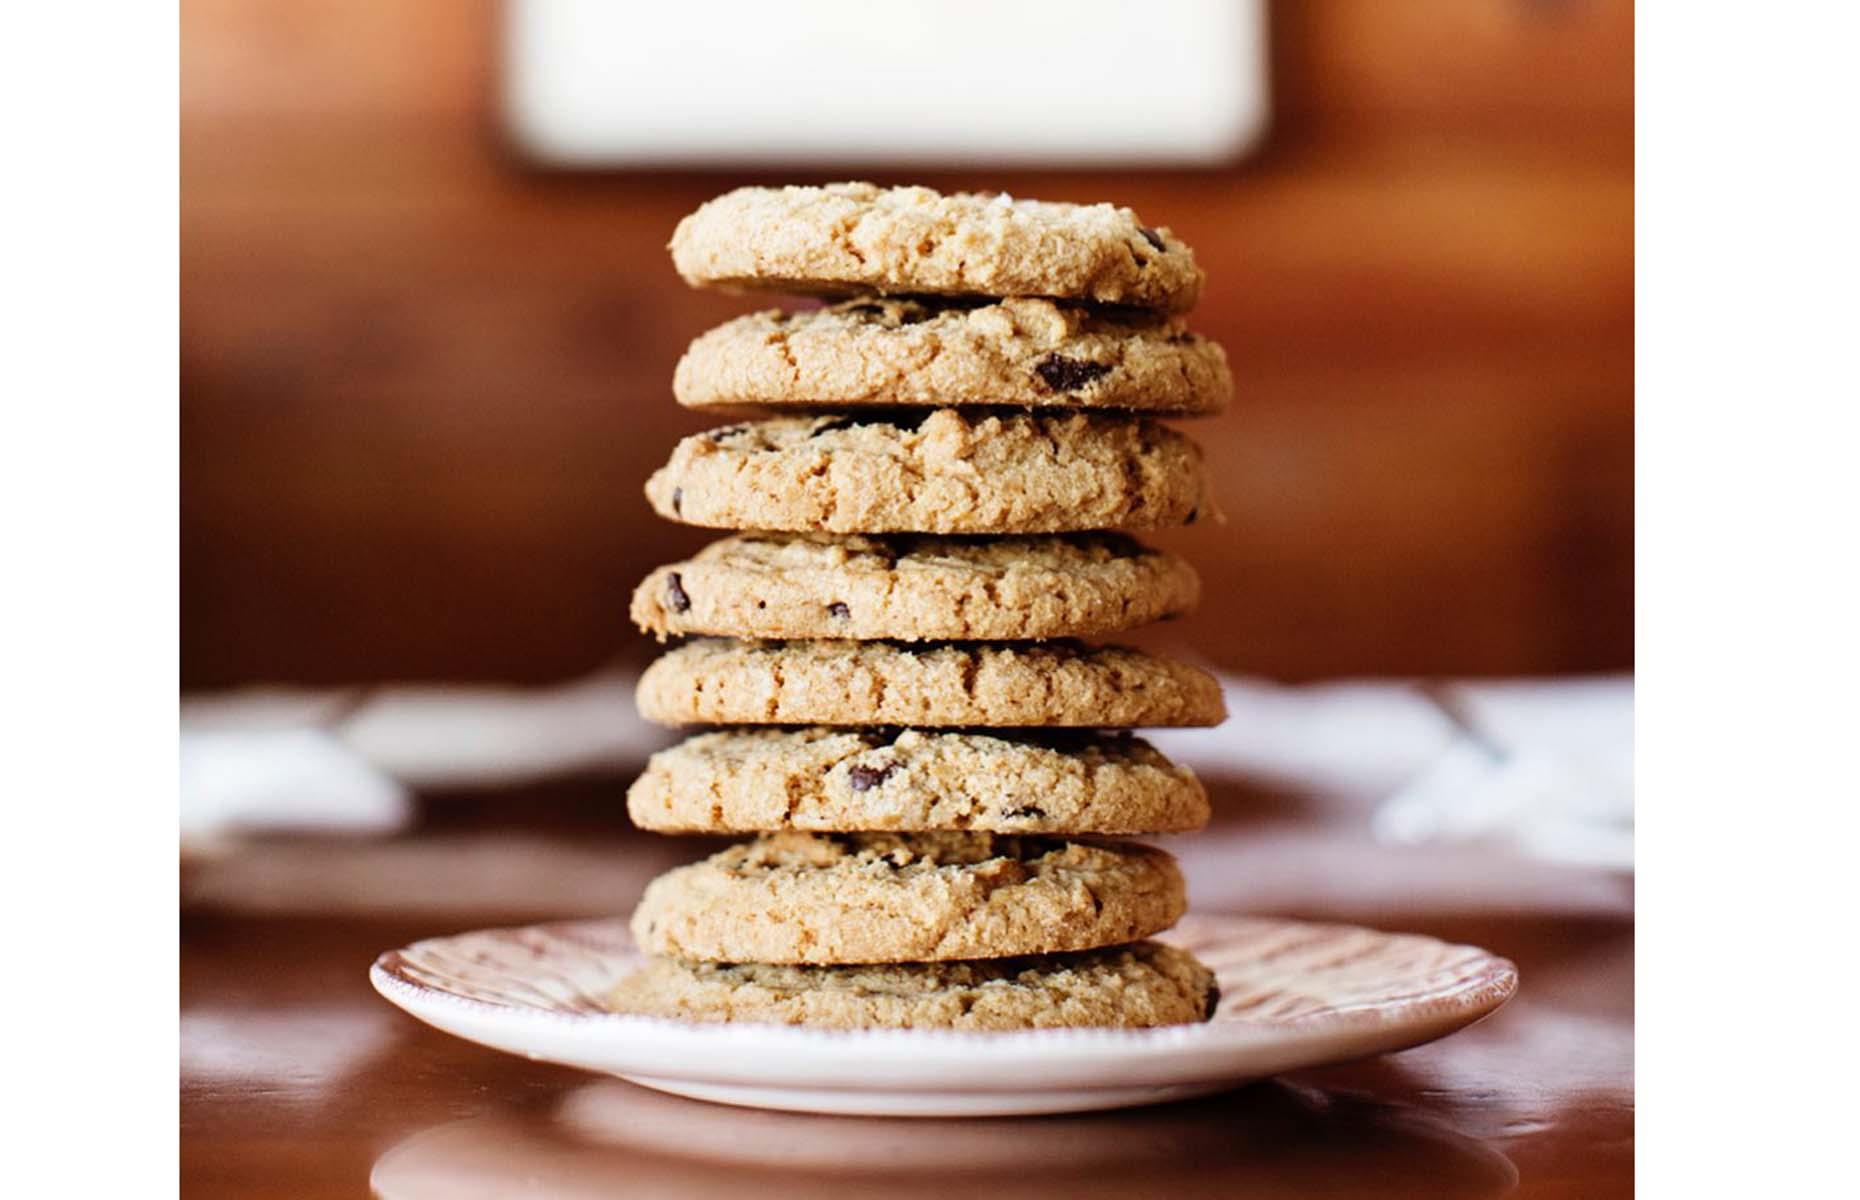 Your State's Most Tempting Treat: Where To Find The Tastiest Cookies